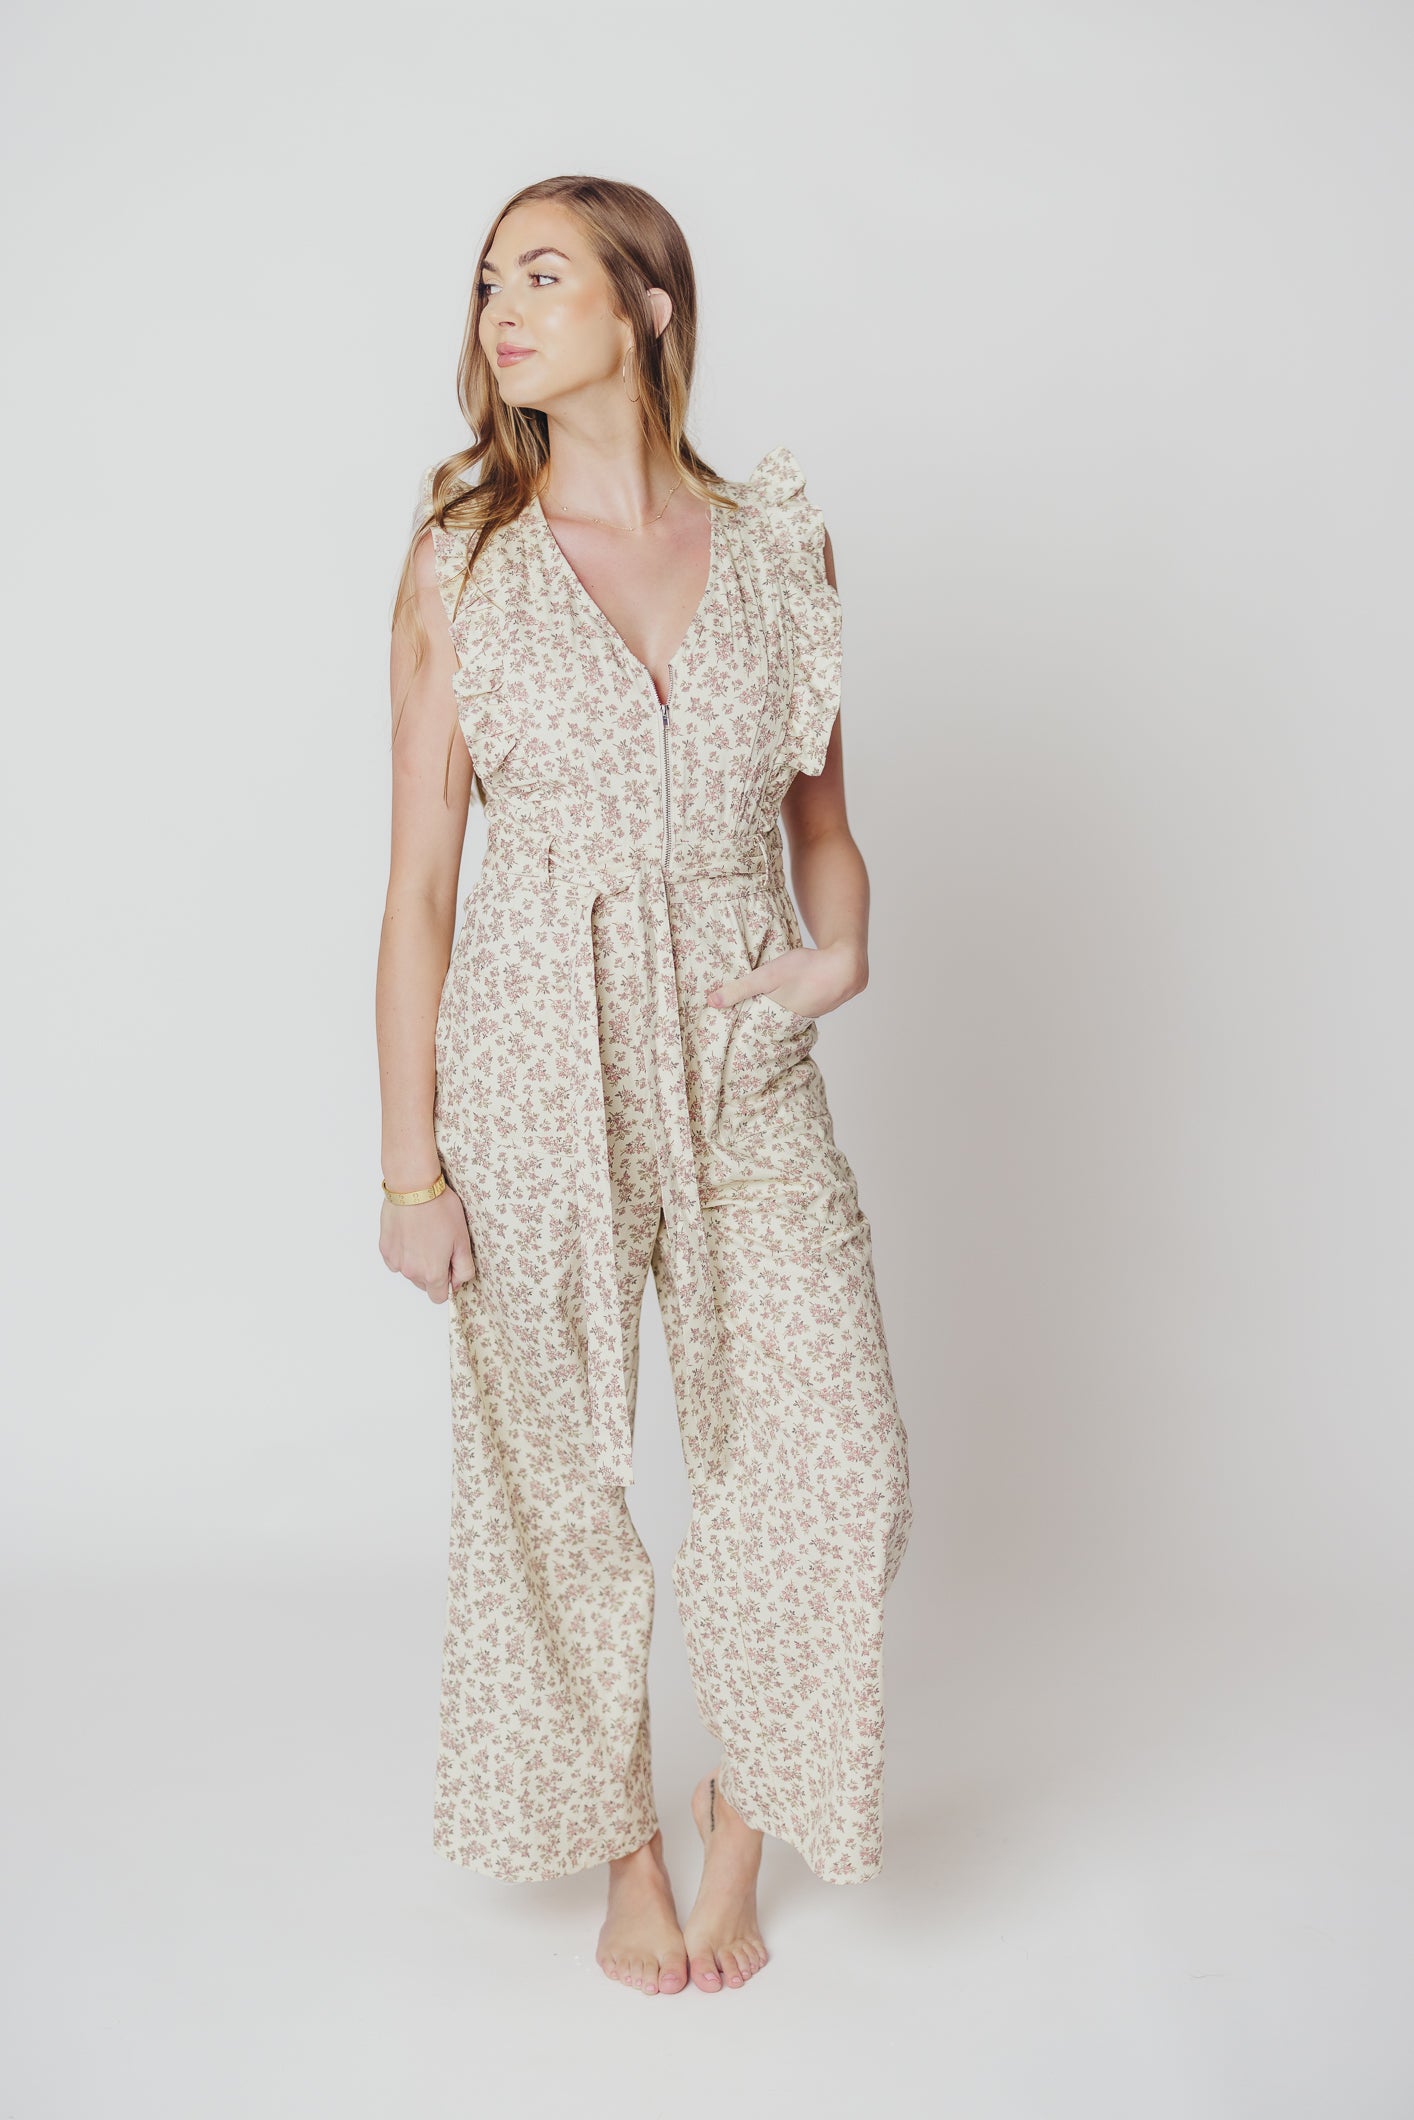 Janet Zippered Jumpsuit with Ruffles in Cream/Pink Floral - Nursing Friendly